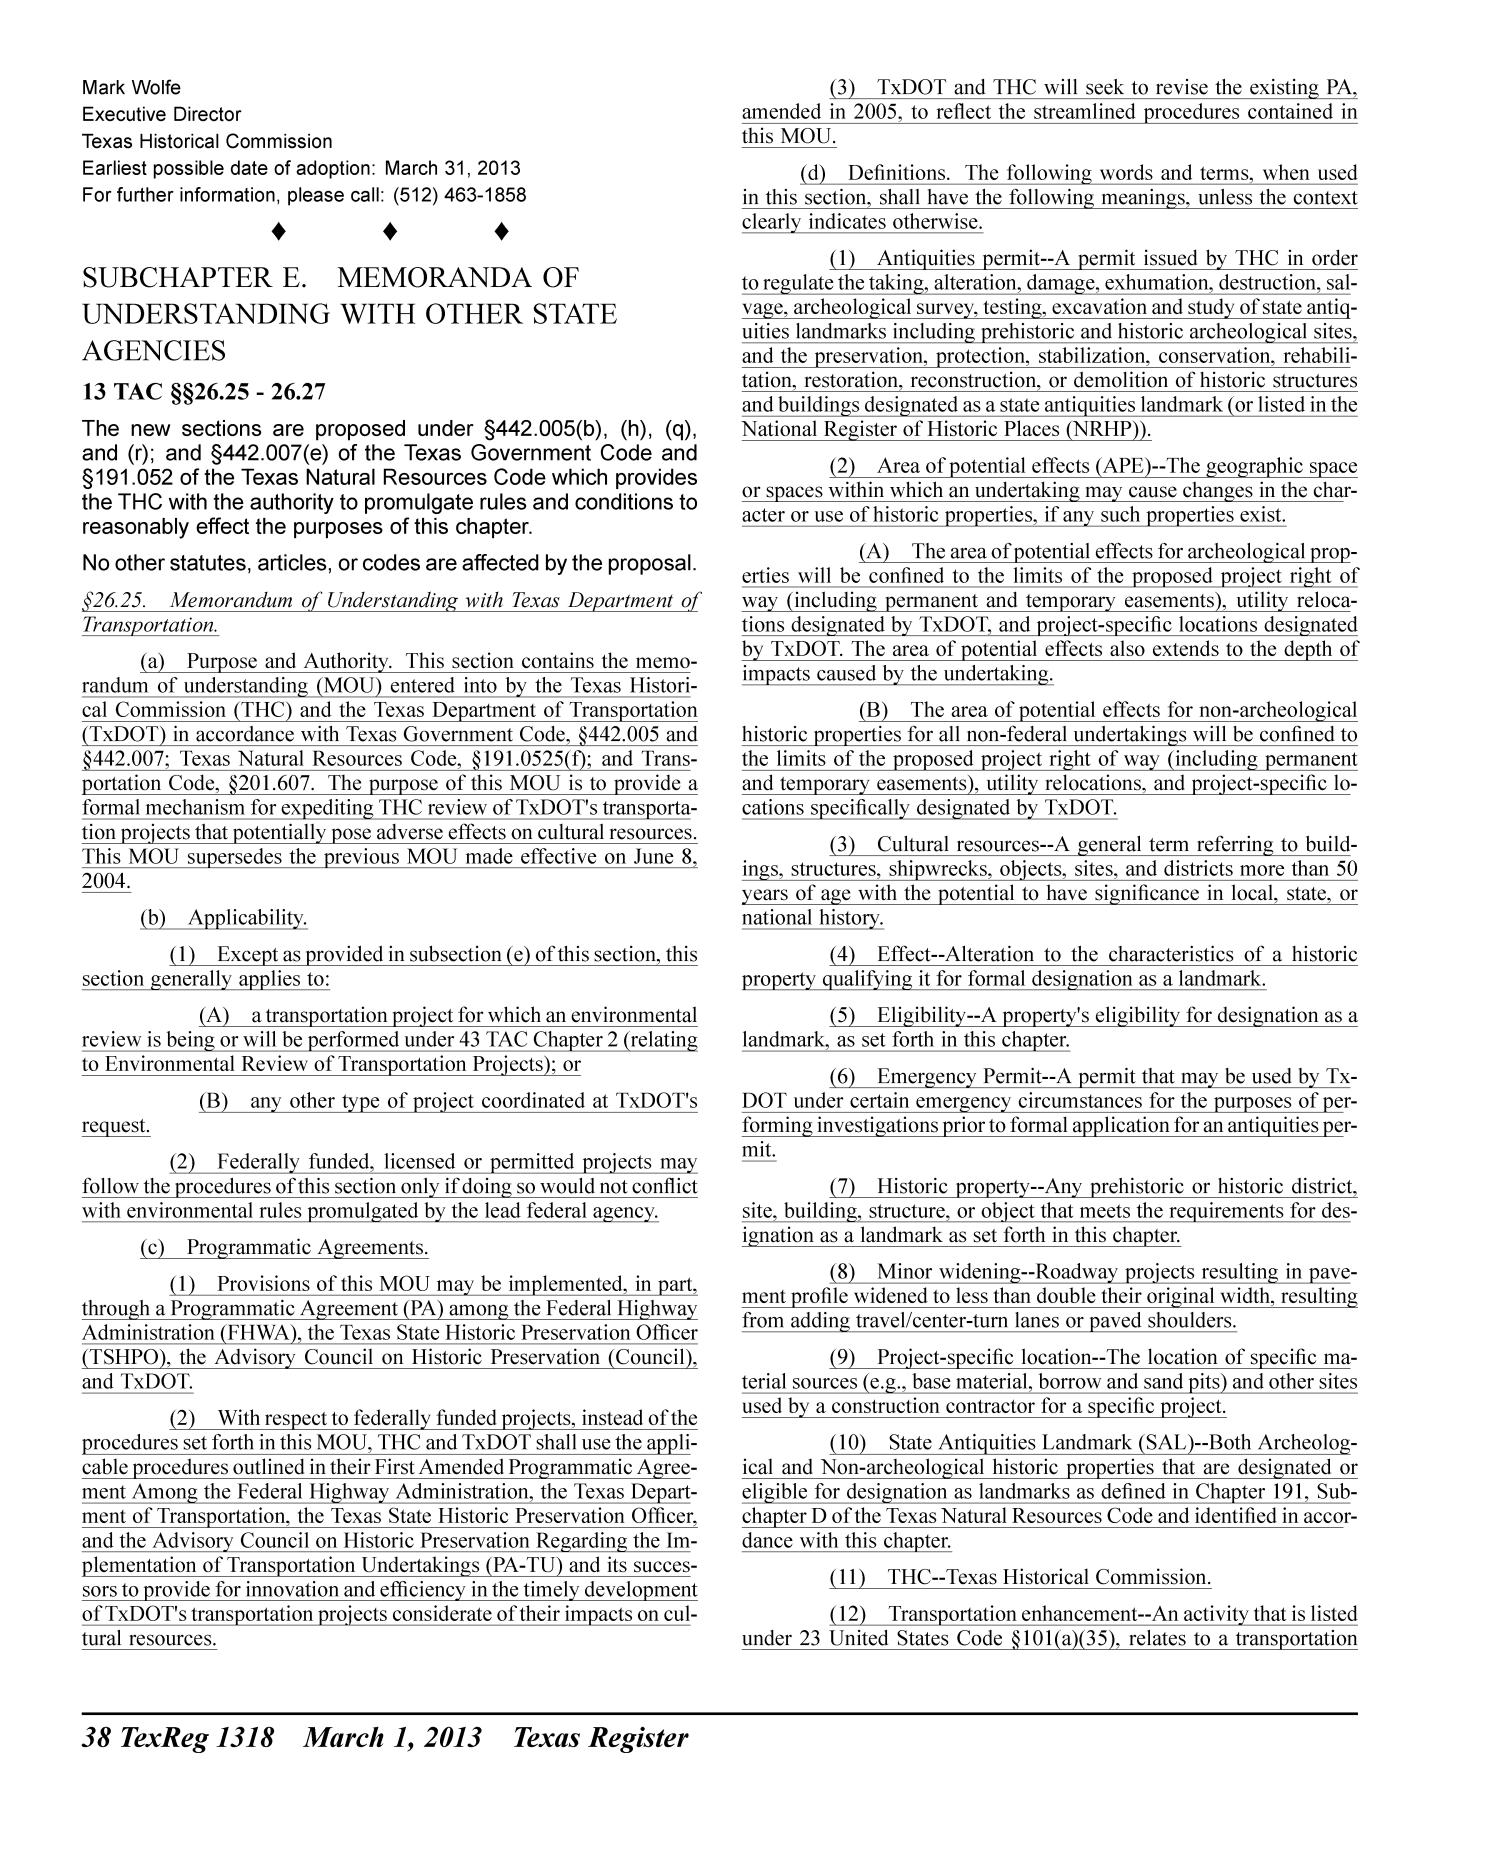 Texas Register, Volume 38, Number 9, Pages 1269-1452, March 1, 2013
                                                
                                                    1318
                                                